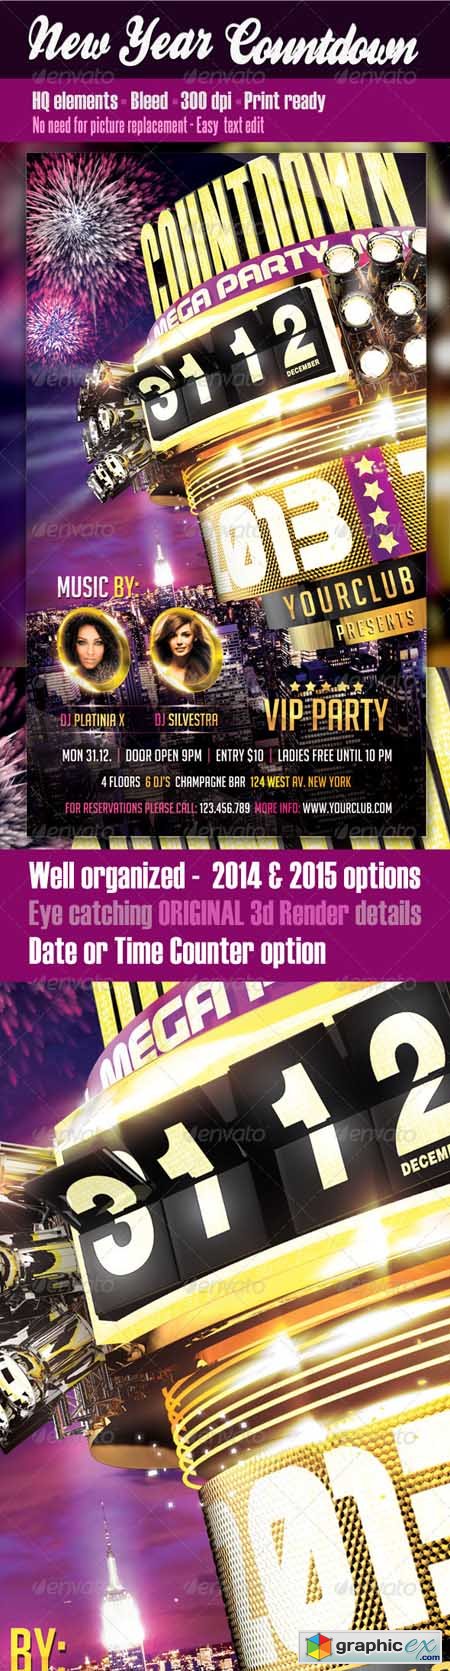 New Year Countdown Flyer 3567759